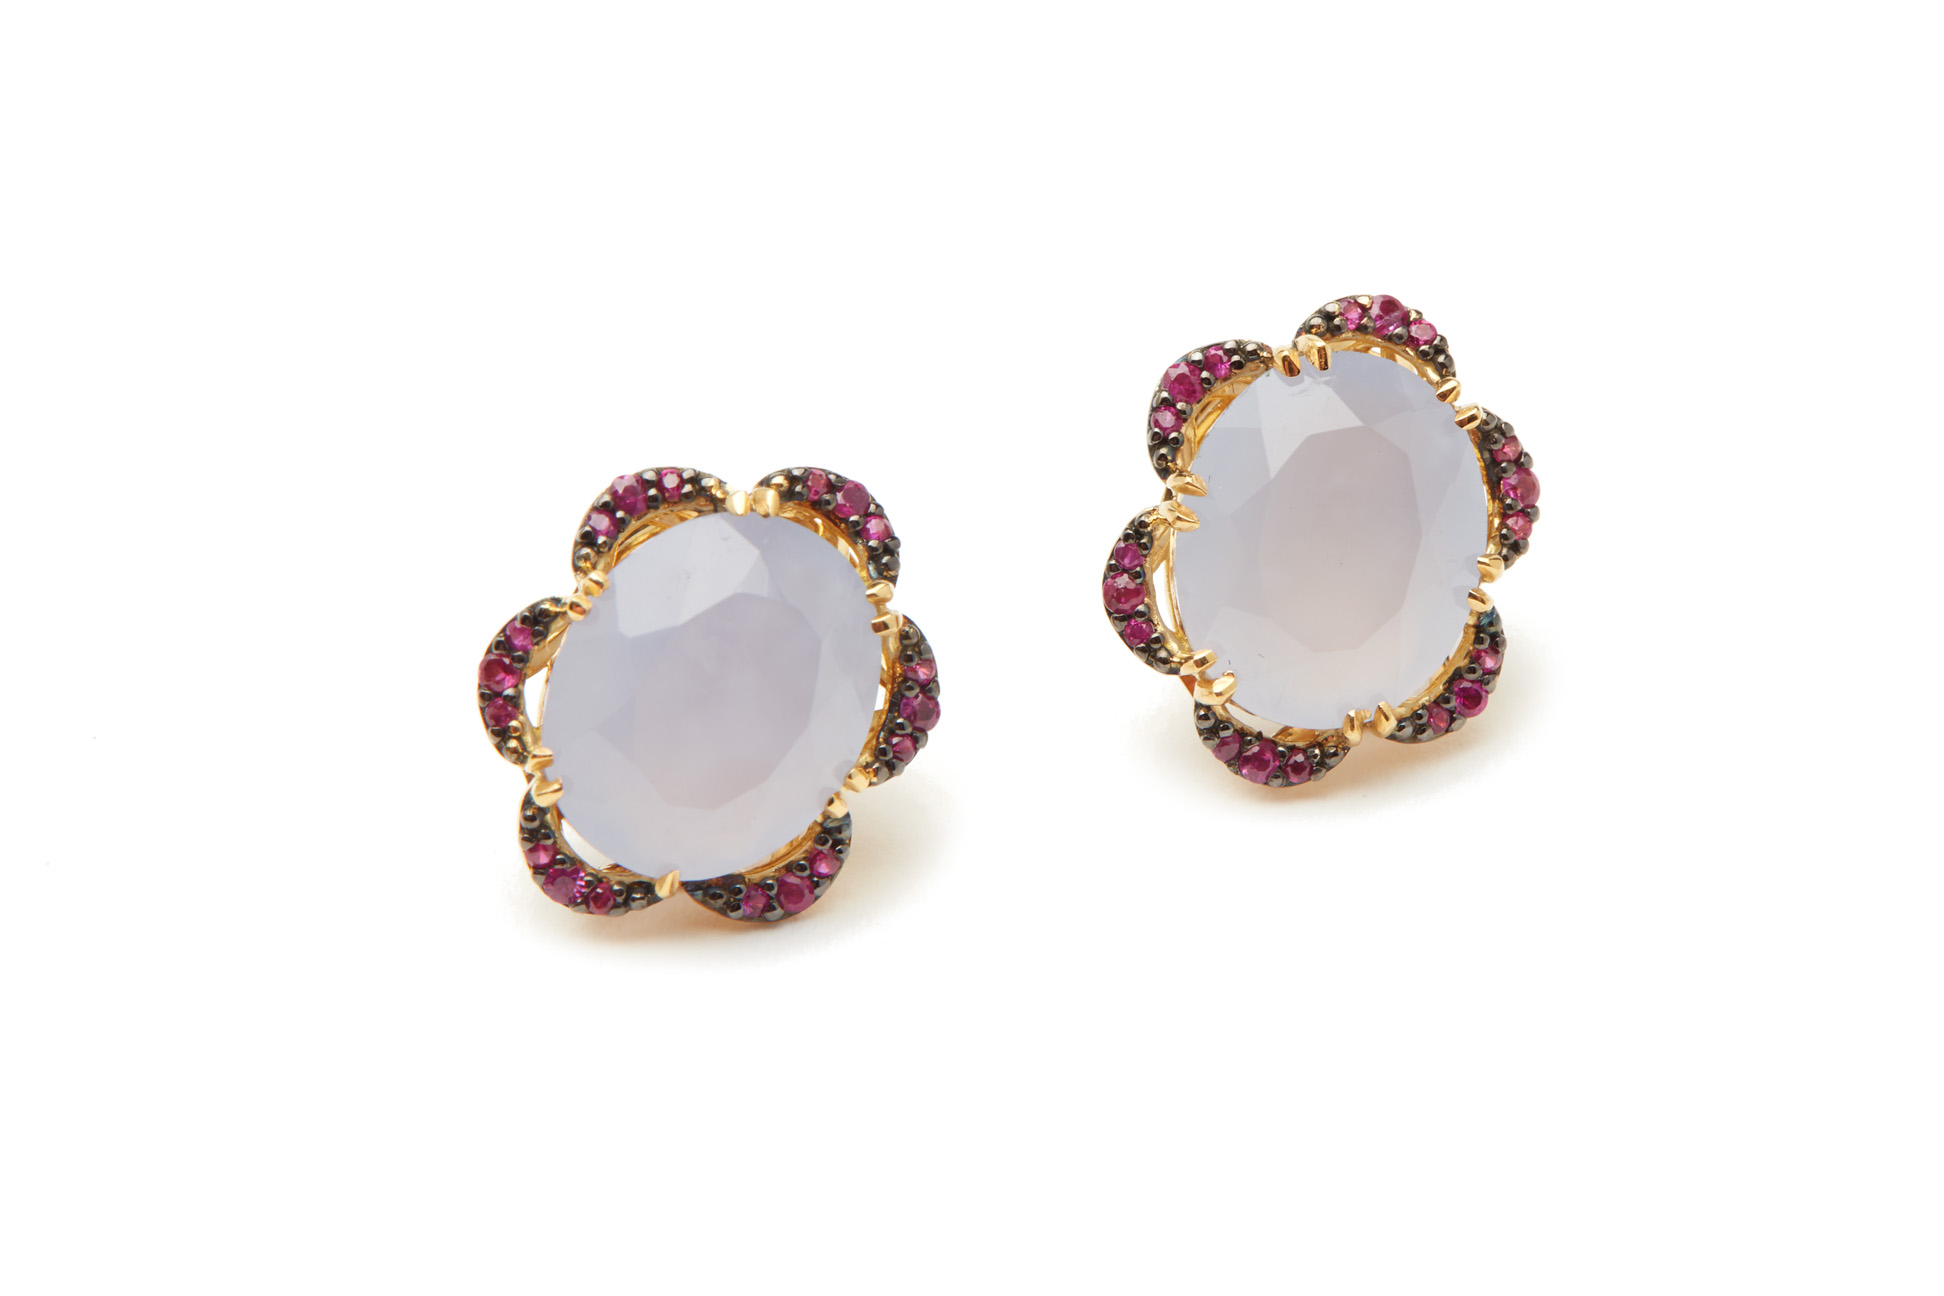 A PAIR OF CHALCEDONY AND RUBY STUD EARRINGS